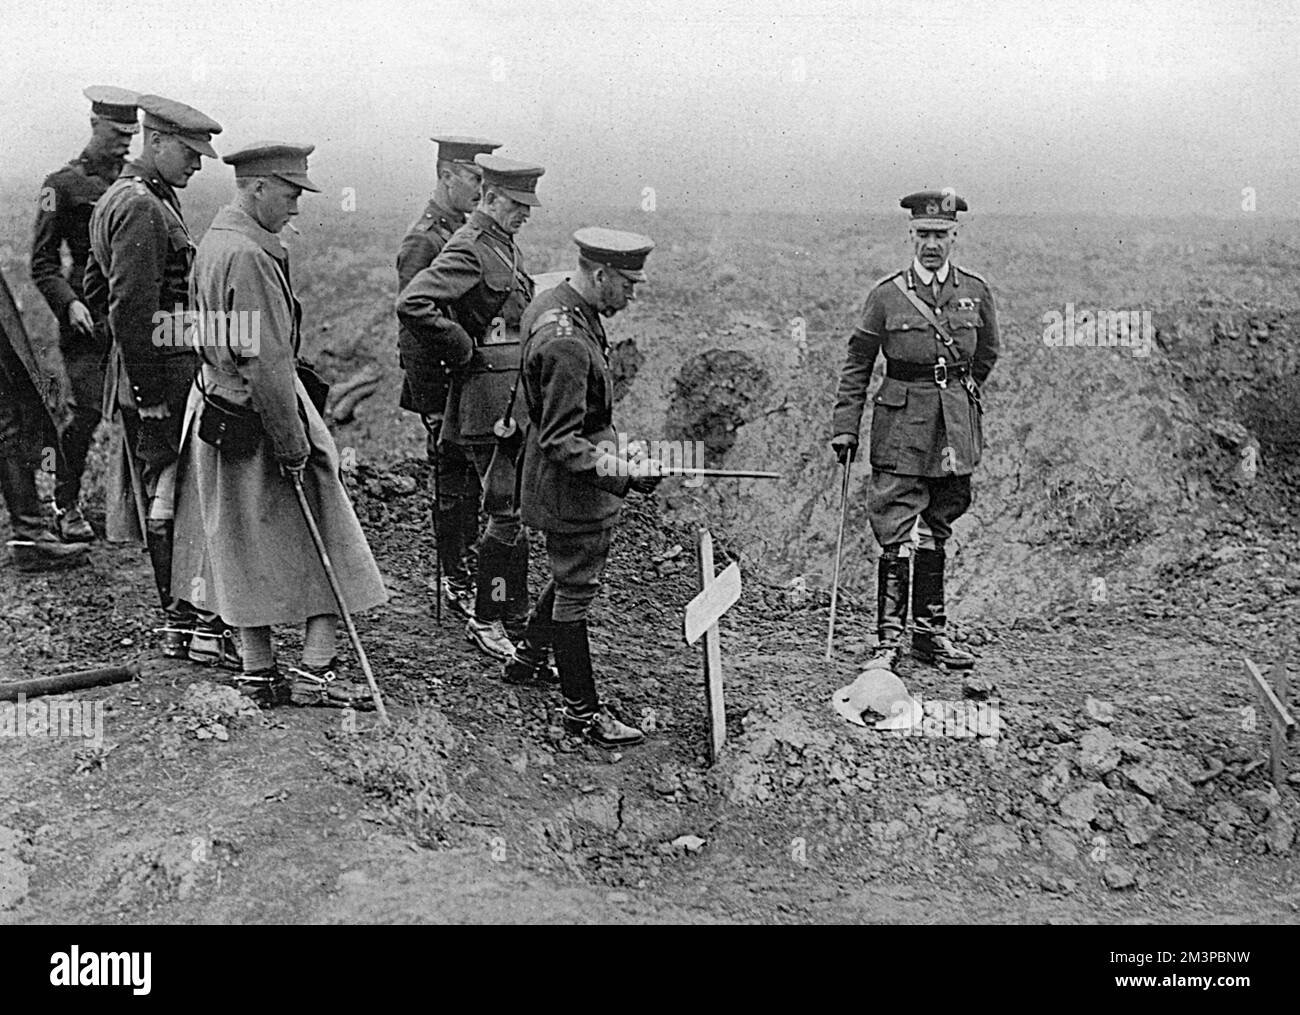 King George V beside the grave of a British soldier, marked with a cross and a steel helmet, on the battlefield during a visit to the Front in 1916. Among the others accompanying the King is Edward, Prince of Wales (later King Edward VIII, Duke of Windsor), who is seen in a great coat smoking a cigarette.     Date: 1916 Stock Photo